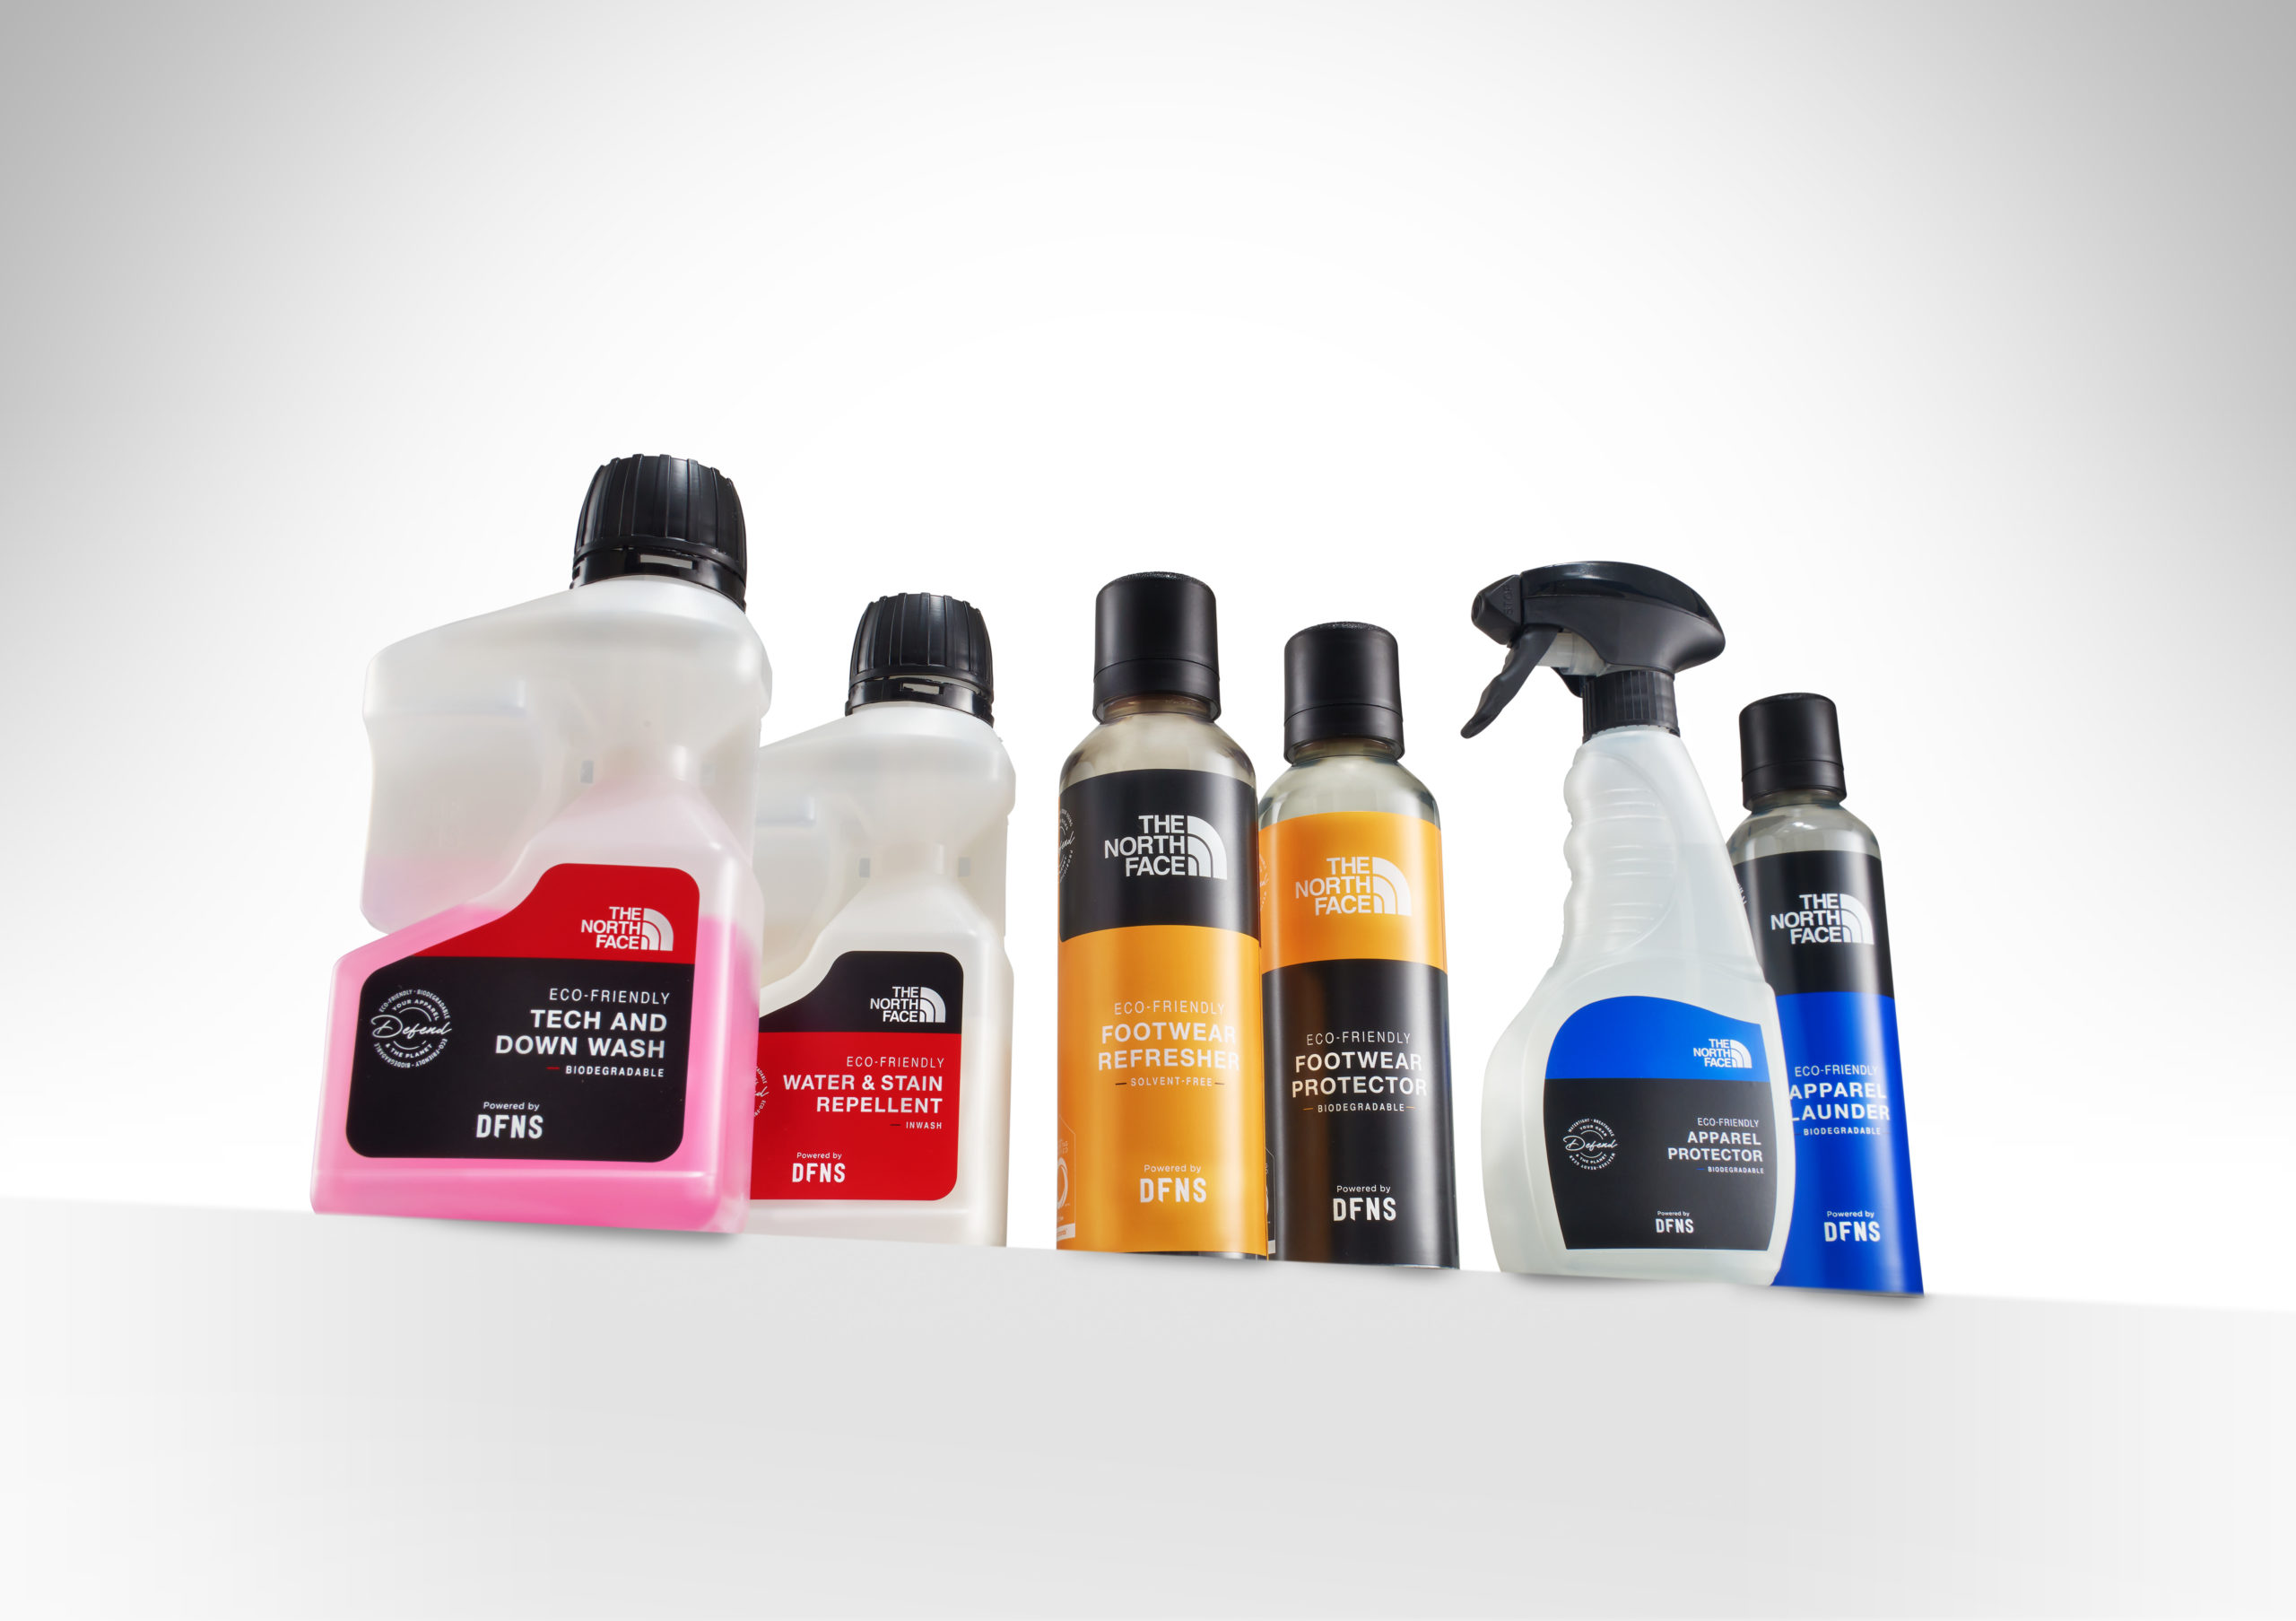 CAR DETAILING PRODUCTS COLLAB WITH SOFT99